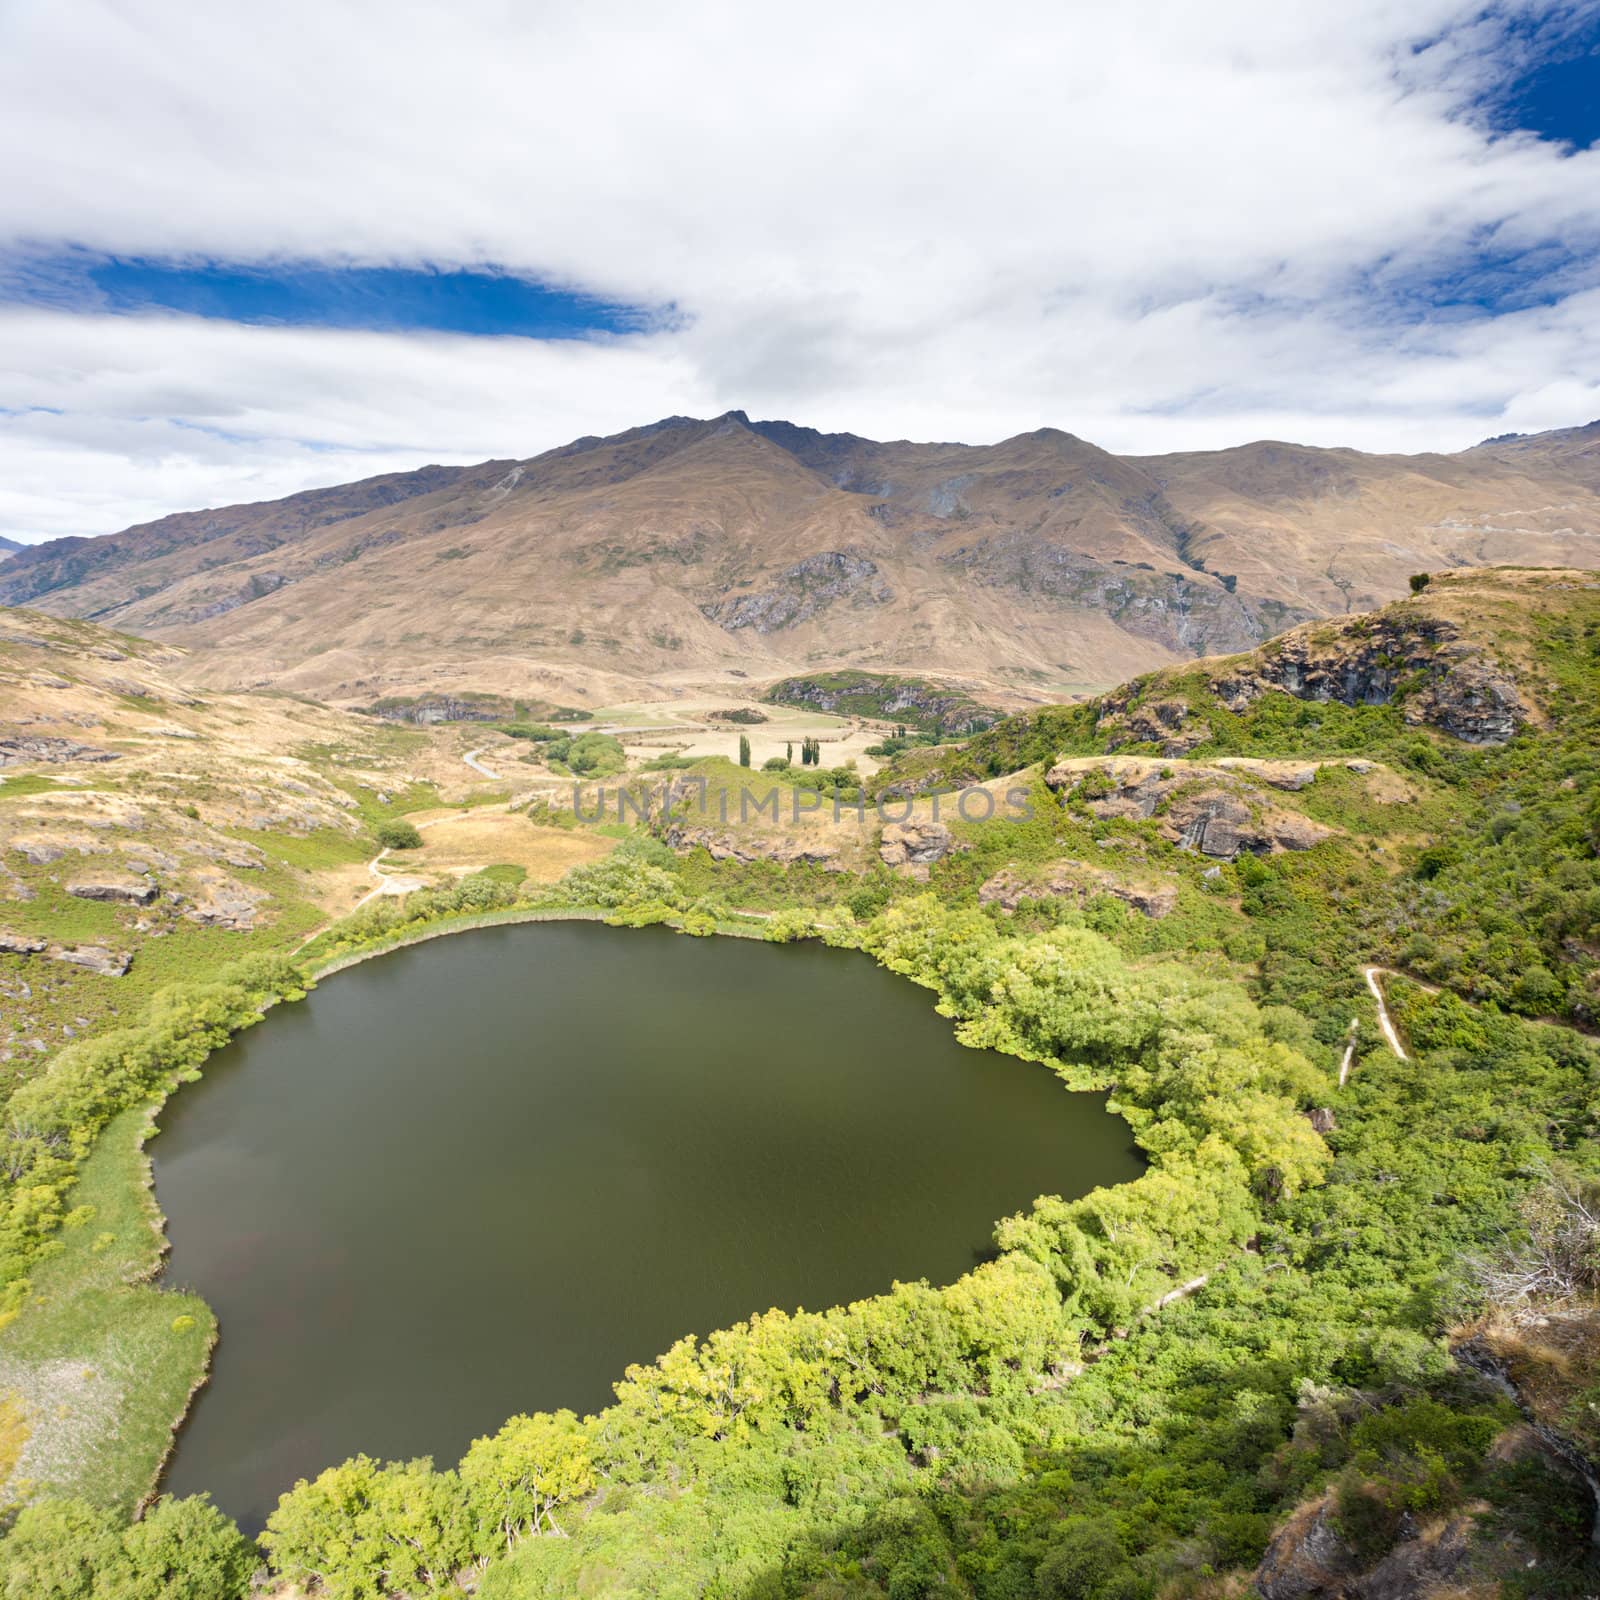 Small lake with lush green vegetation forming an oasis in the summer dry highlands near Wanaka in Central Otago, New Zealand